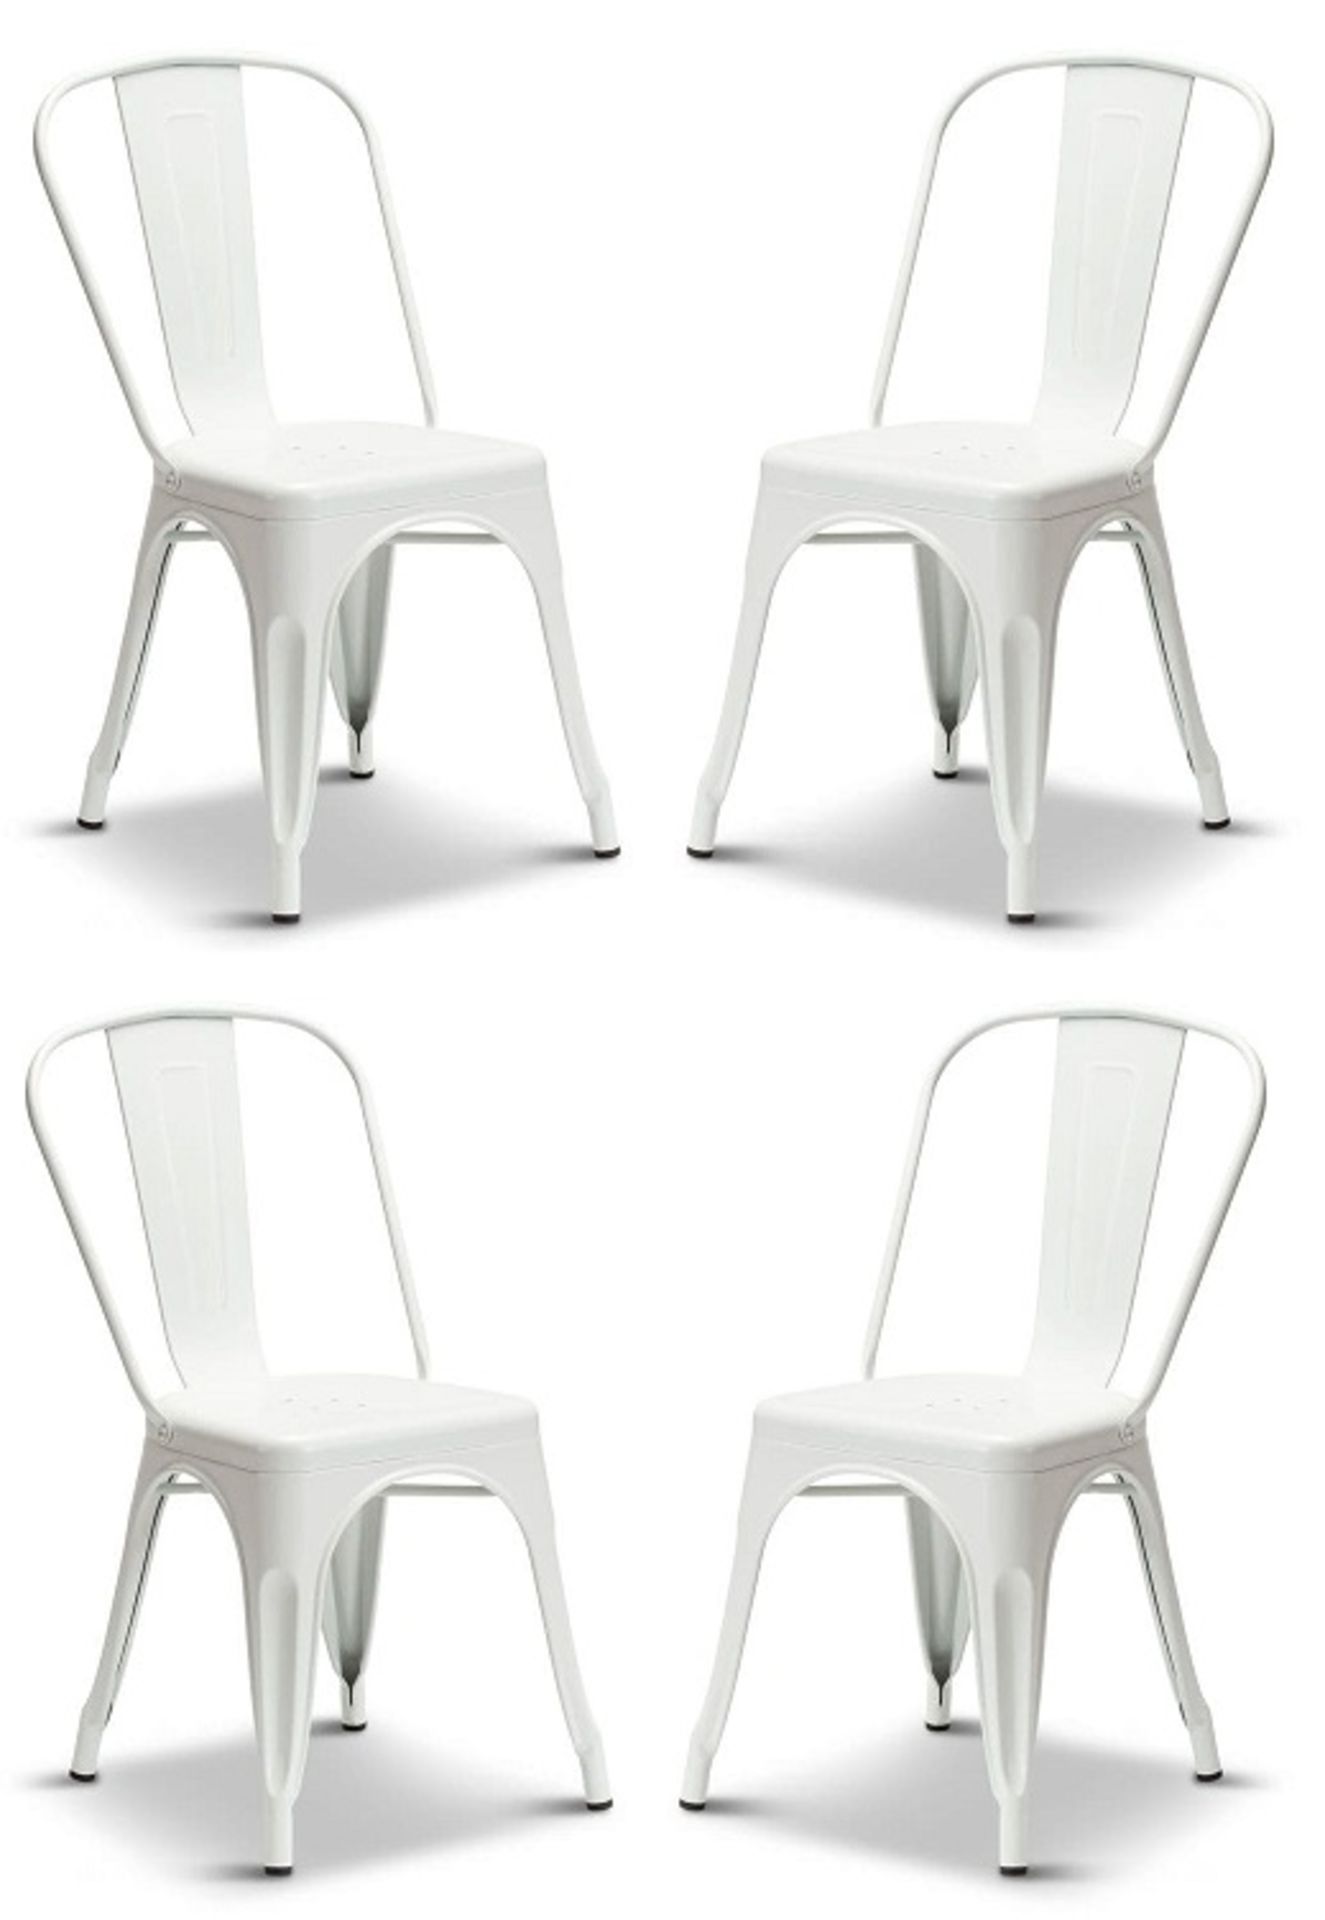 1 x Tolix Industrial Style Outdoor Bistro Table and Chair Set in White- Includes 1 x Table and 4 x - Image 5 of 12